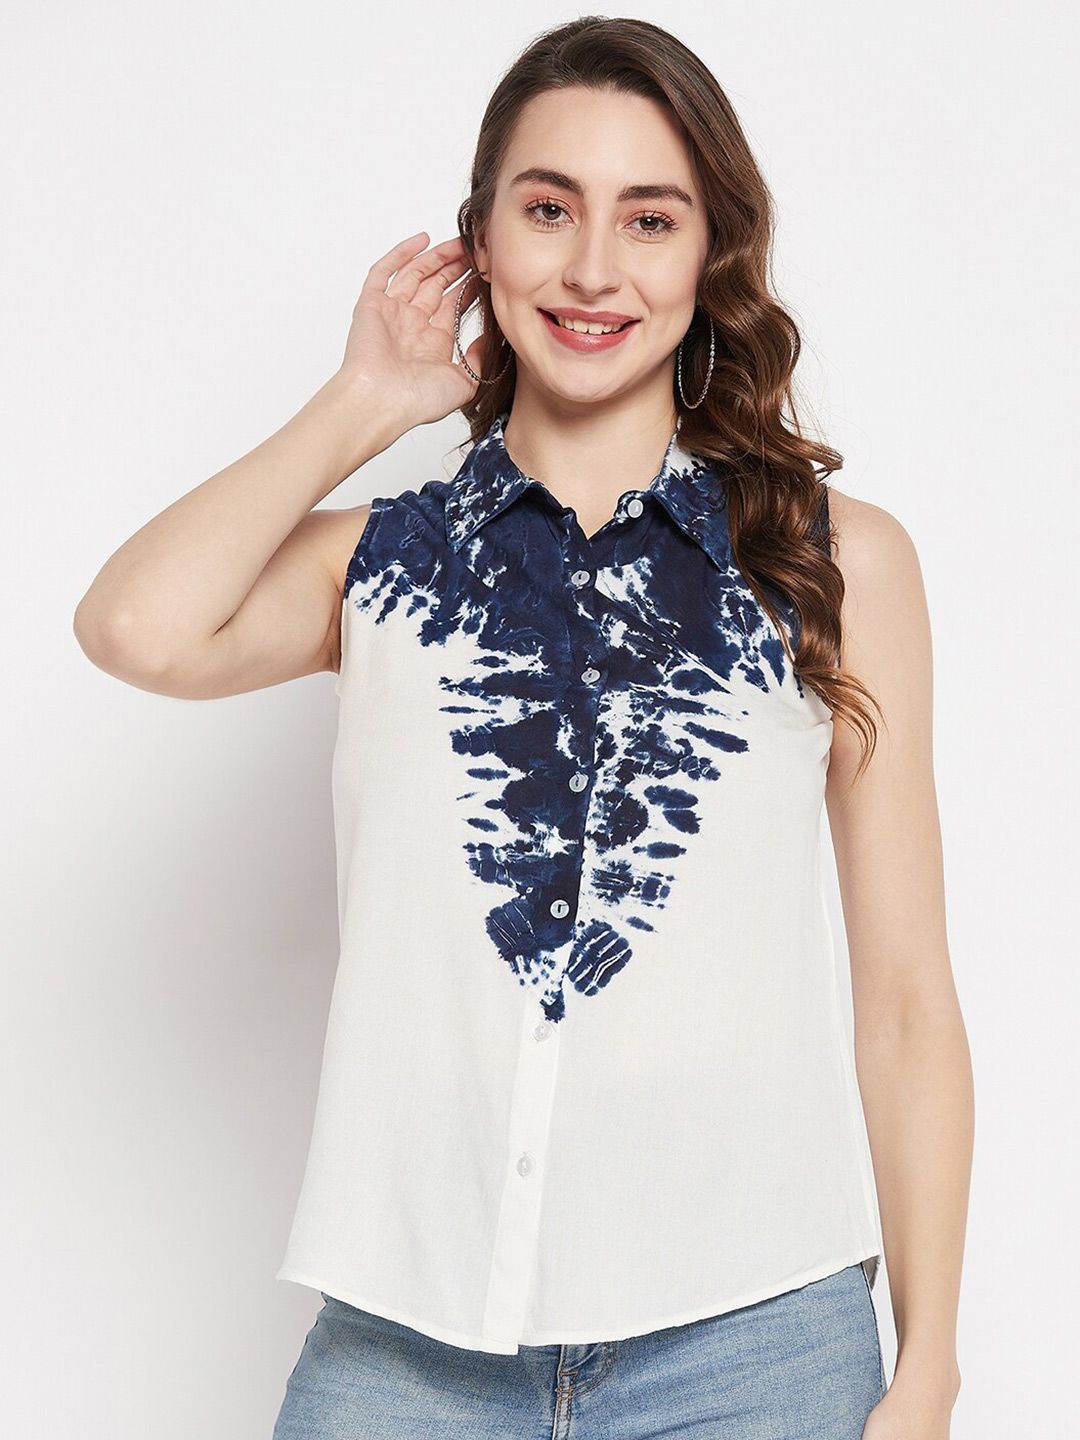 BAESD Tie and Dye Shirt Collar Sleeveless Shirt Style Top Price in India